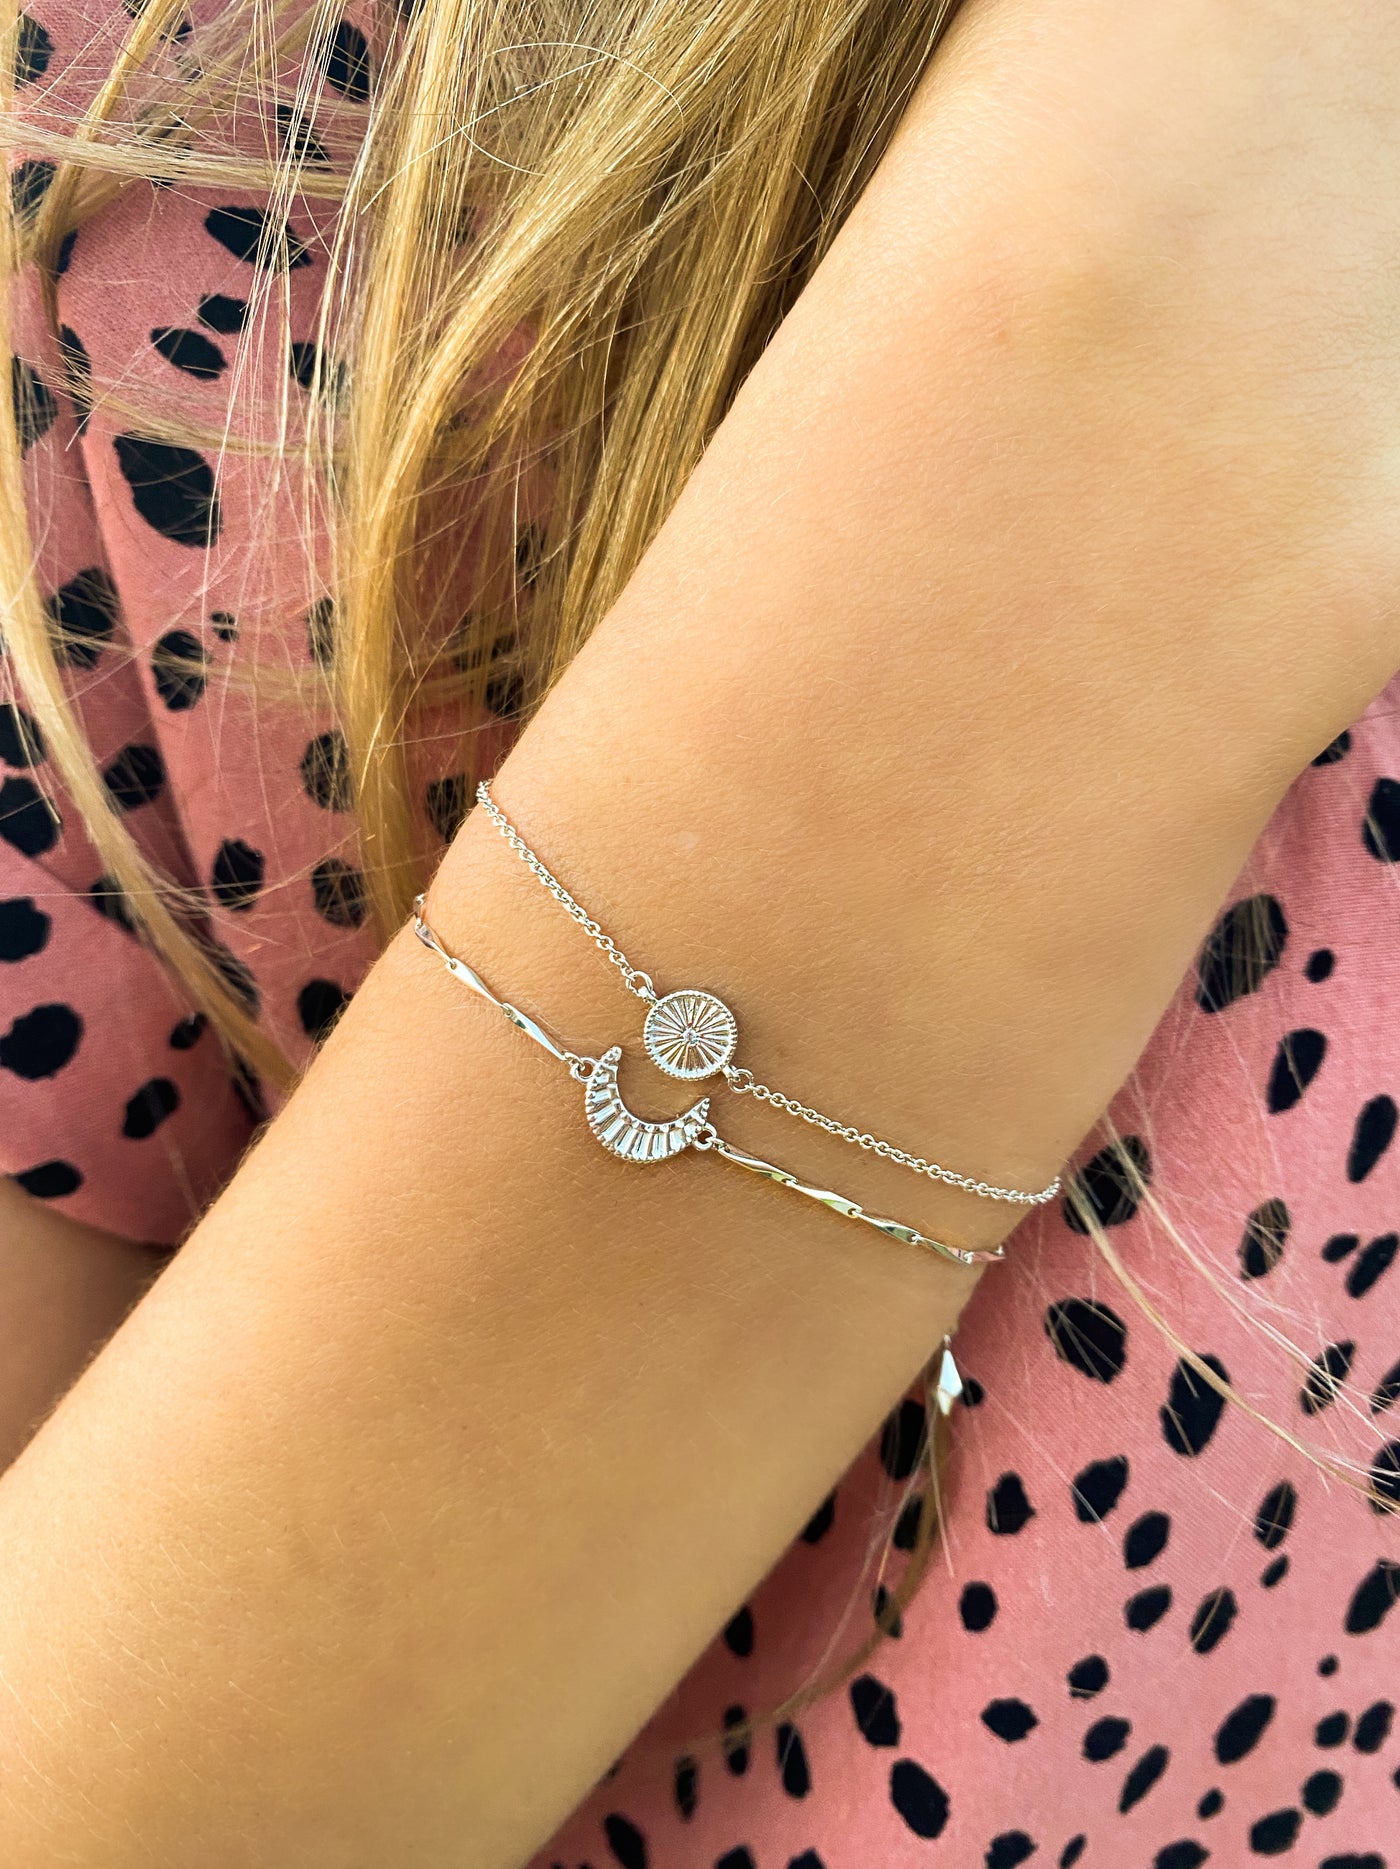 Model wearing sterling silver engraved set of 2 delicate sun and moon bracelets with CZ crystals